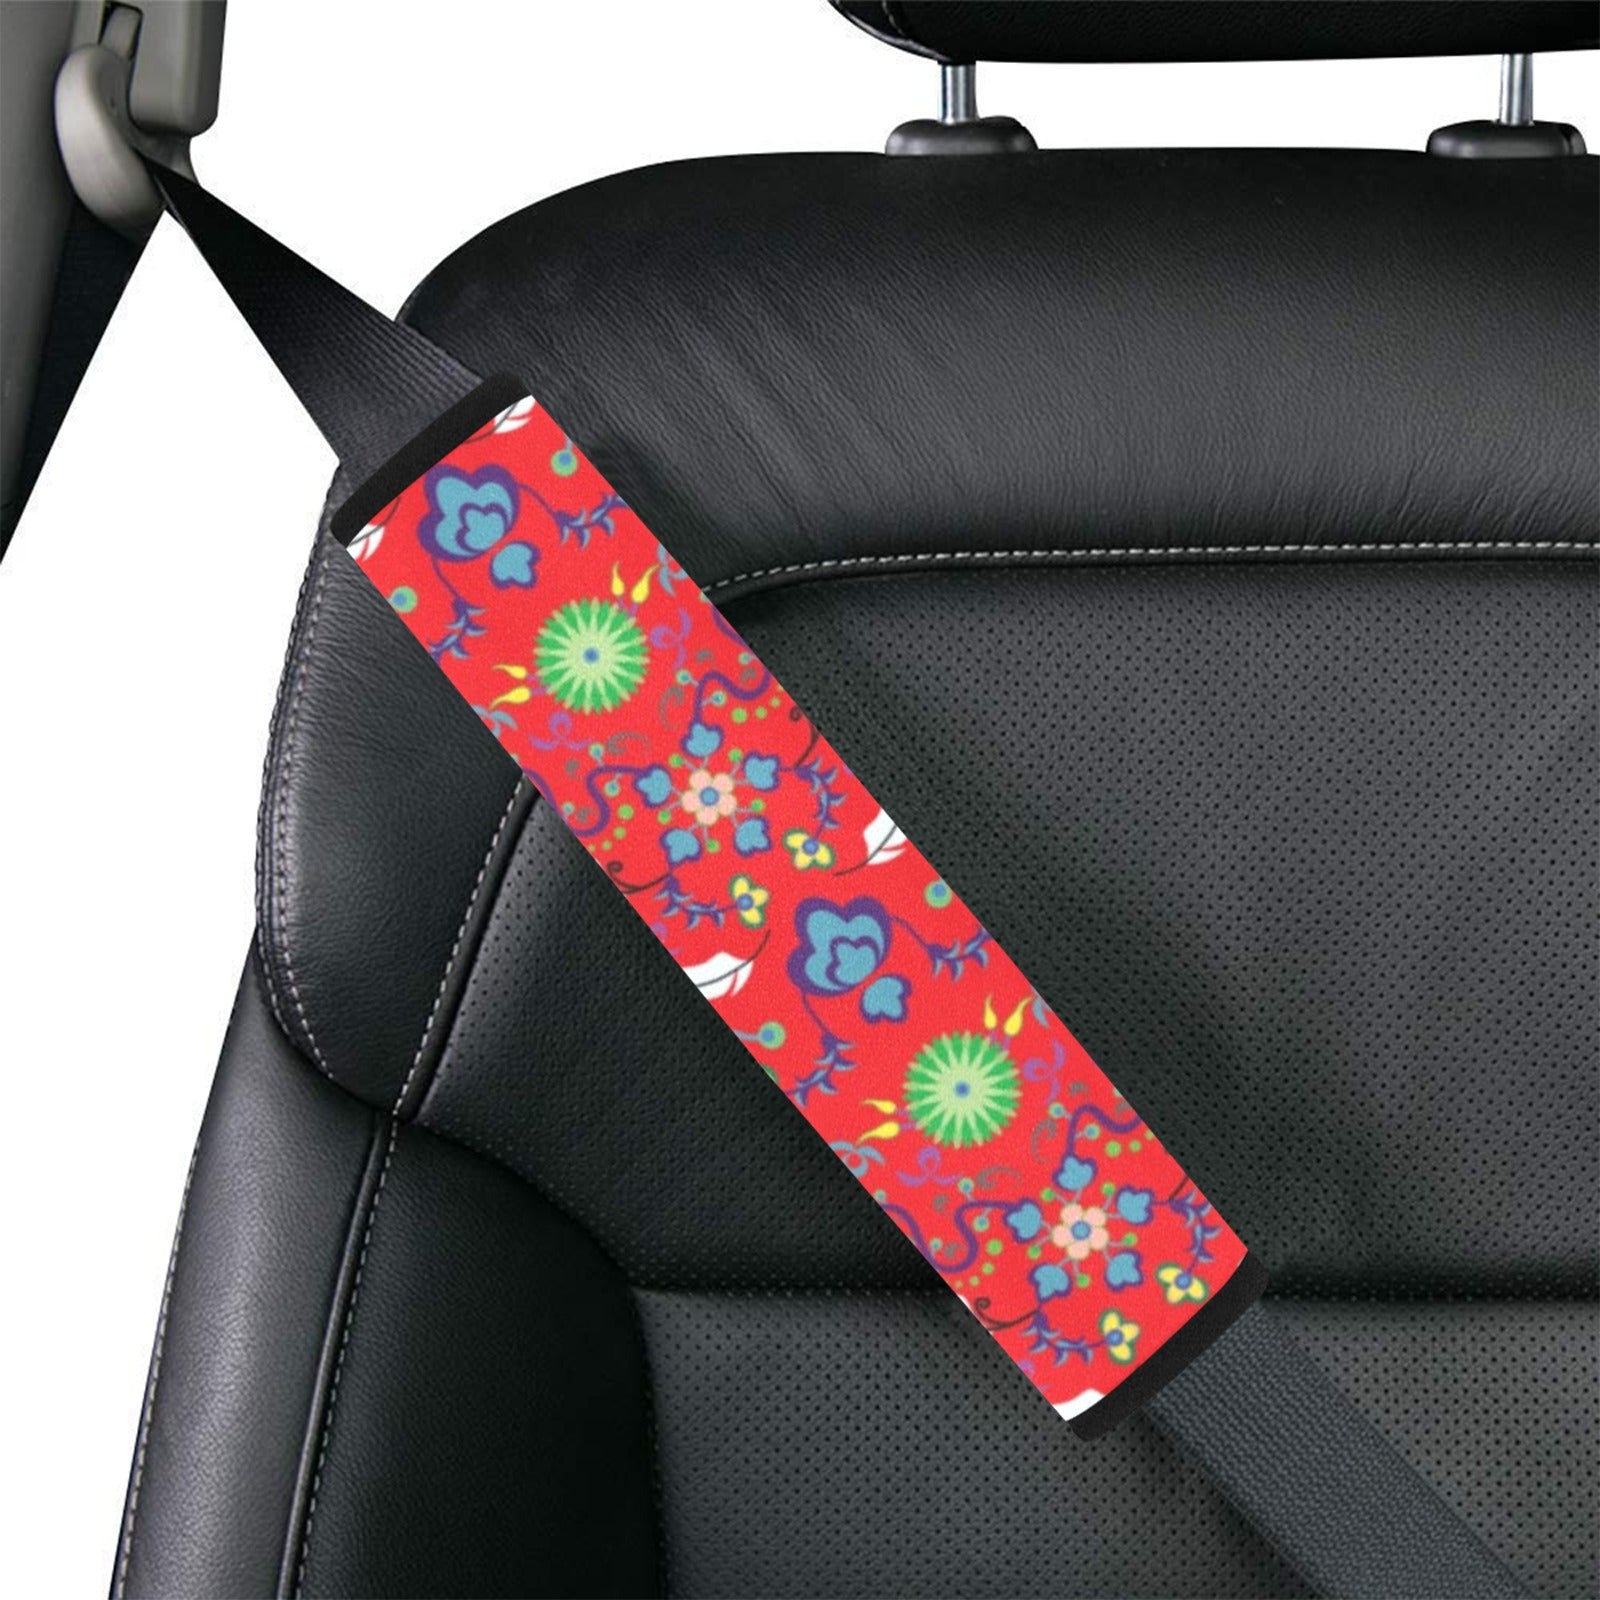 New Growth Vermillion Car Seat Belt Cover 7''x12.6'' (Pack of 2)